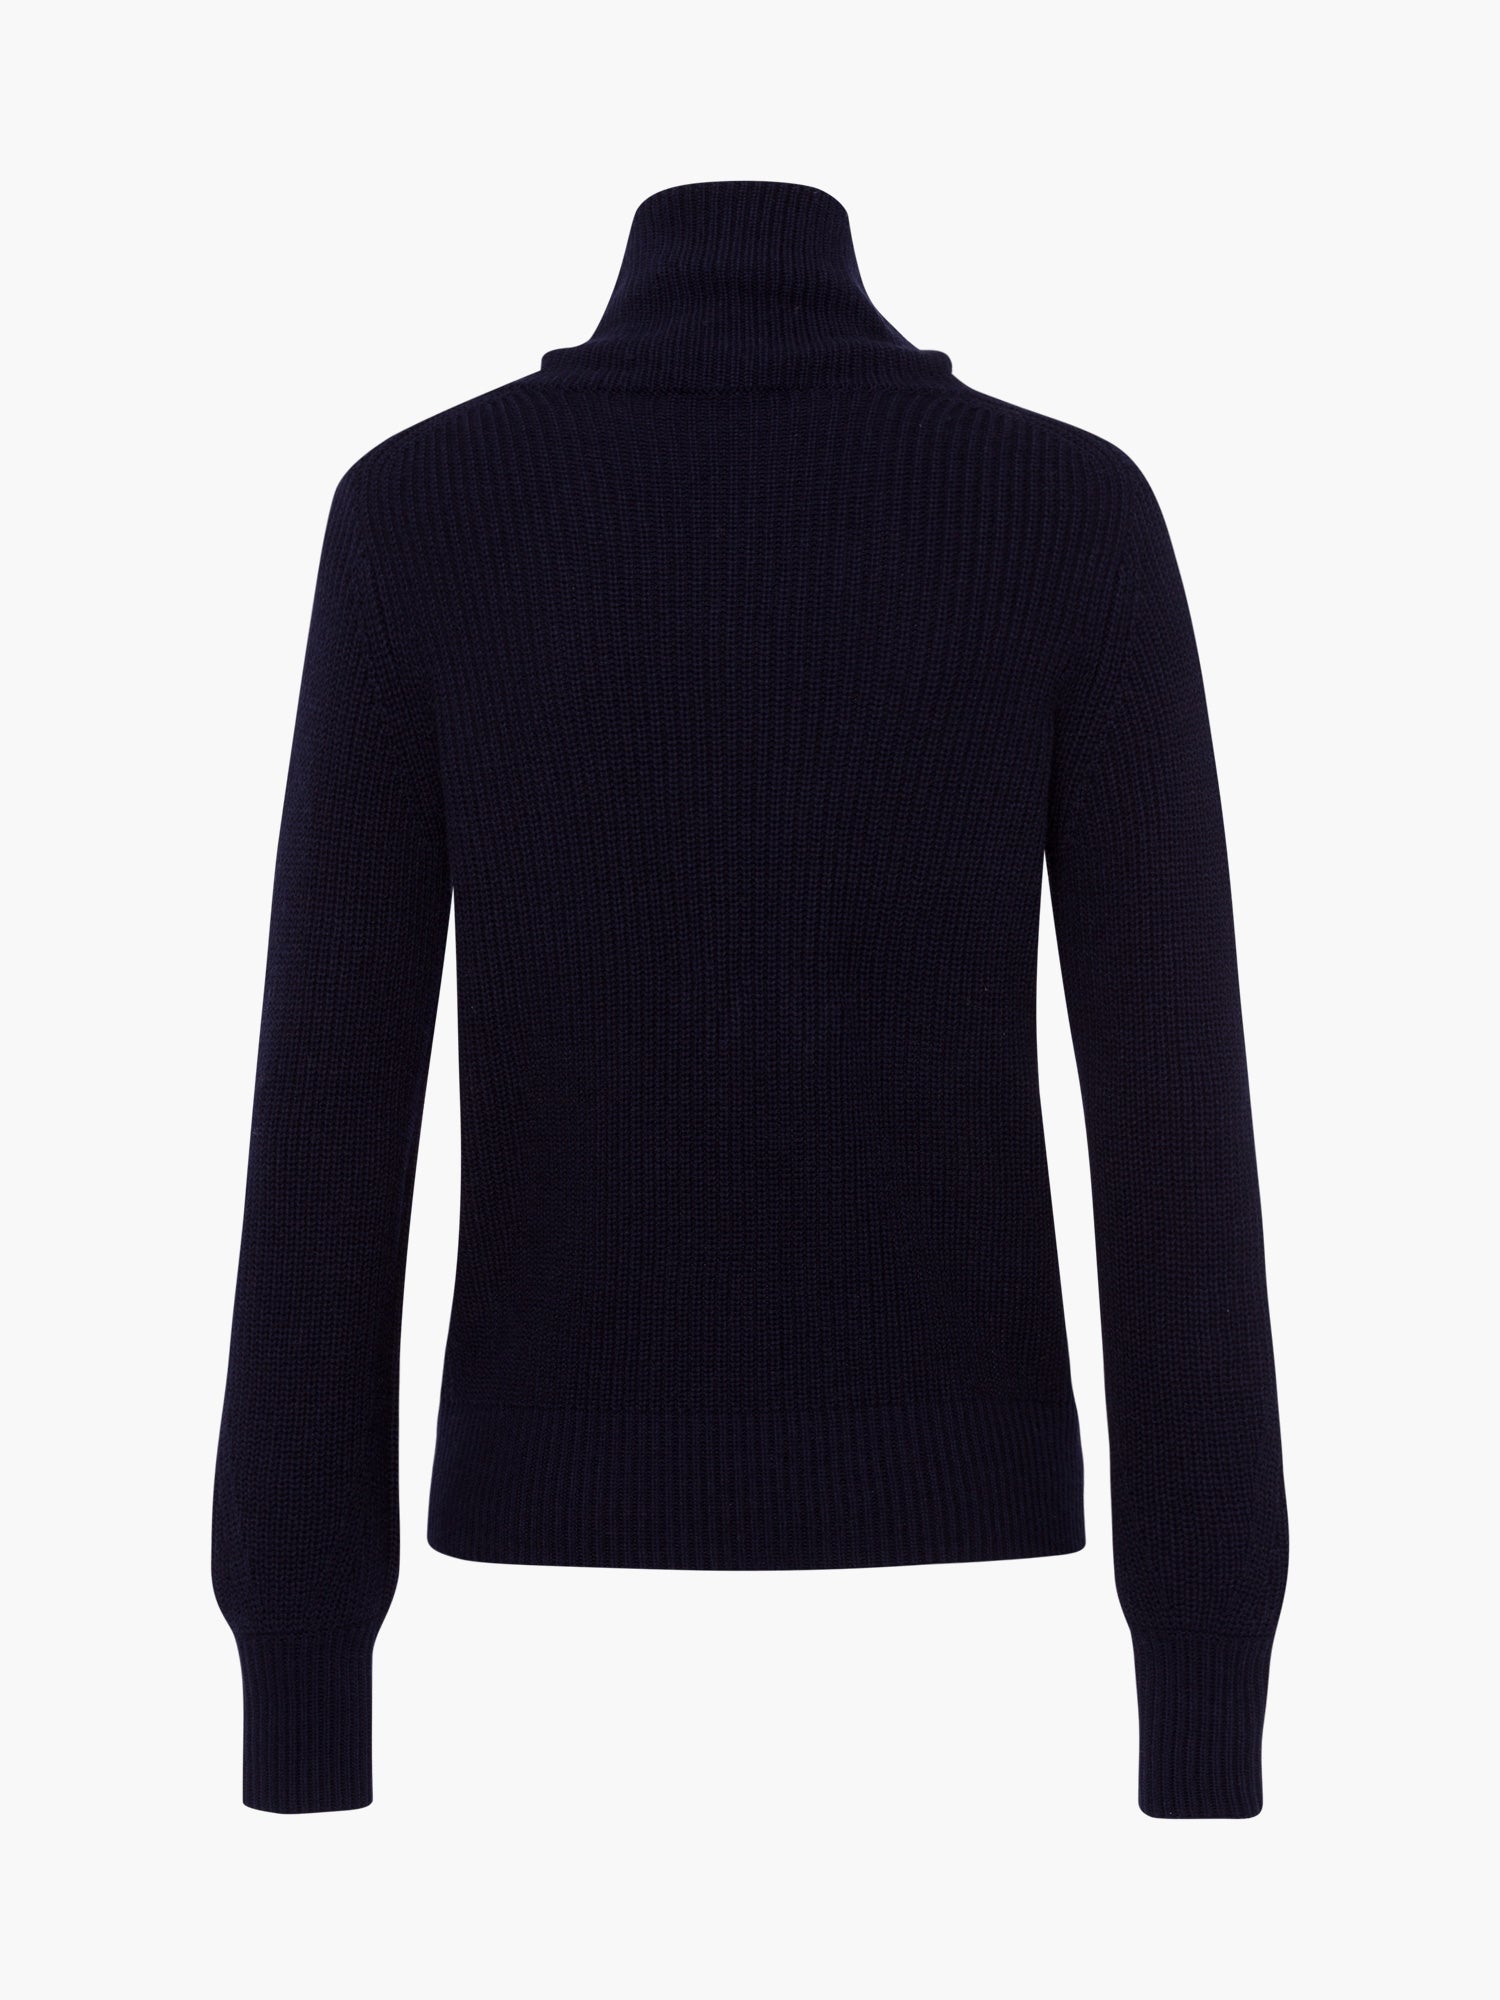 FTC-Cashmere-OUTLET-SALE-Pullover-Highneck-Strick-M-Blue-Space-ARCHIVE-COLLECTION-2.jpg